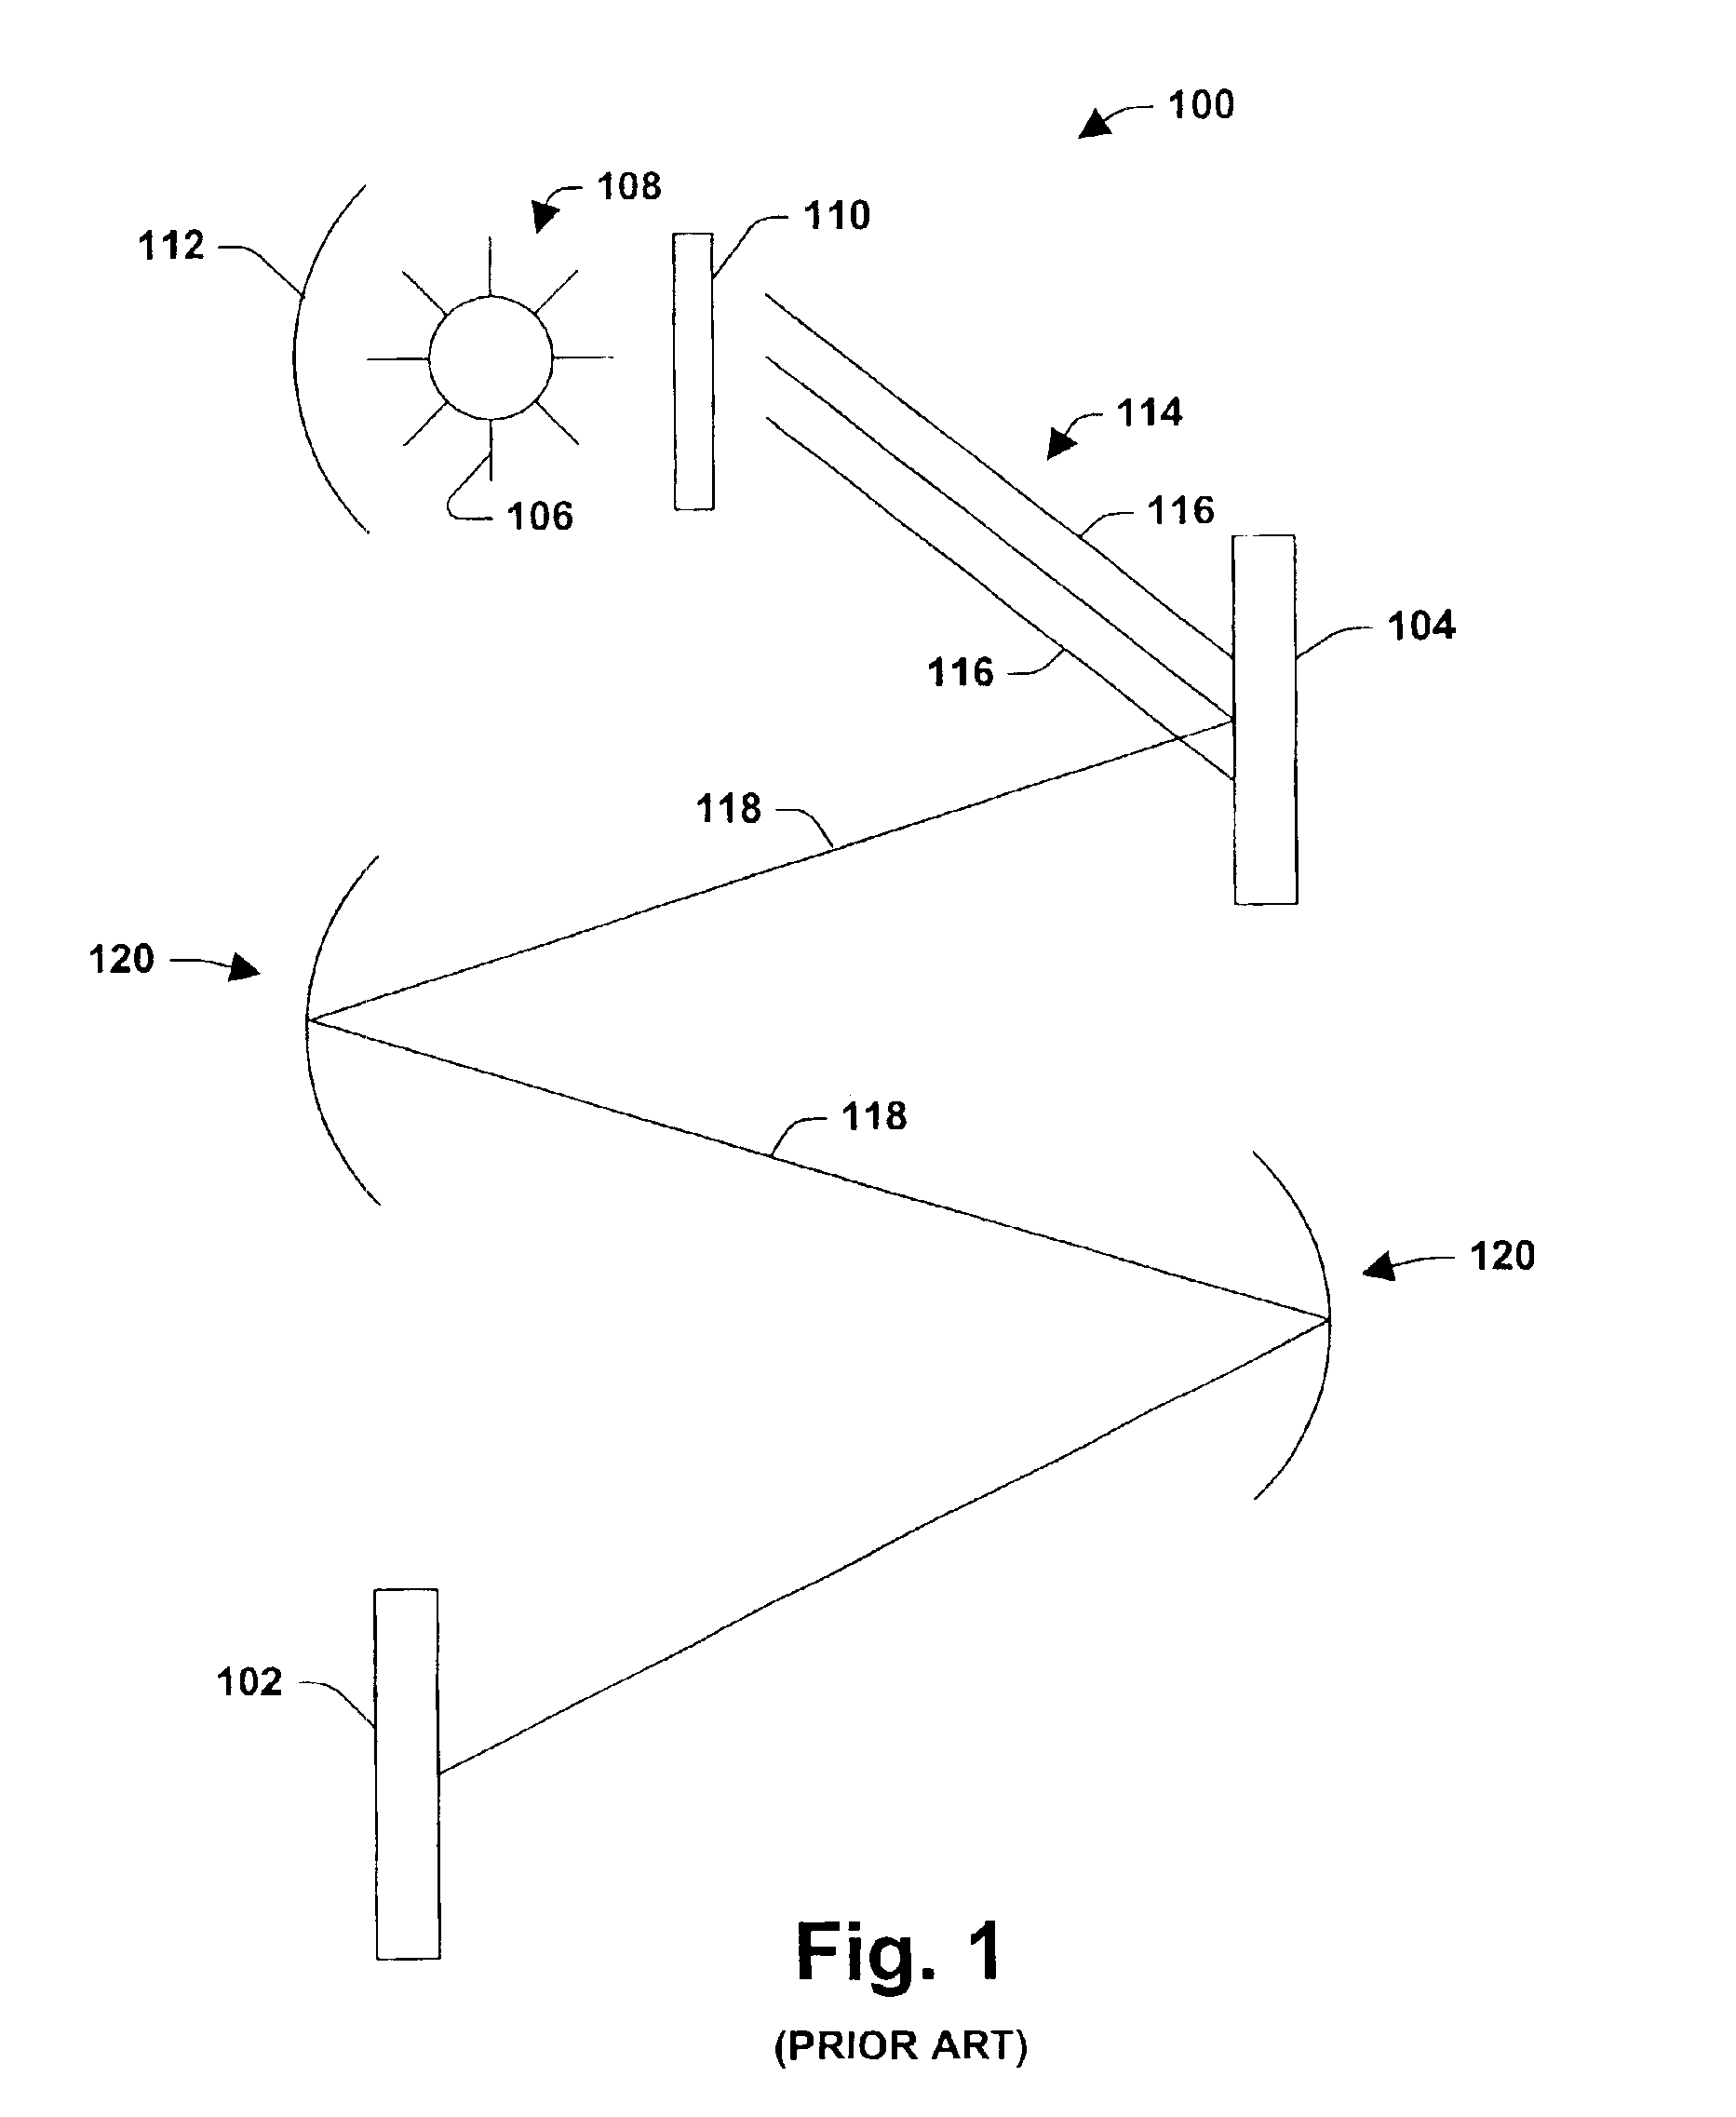 Reflective mask for short wavelength lithography